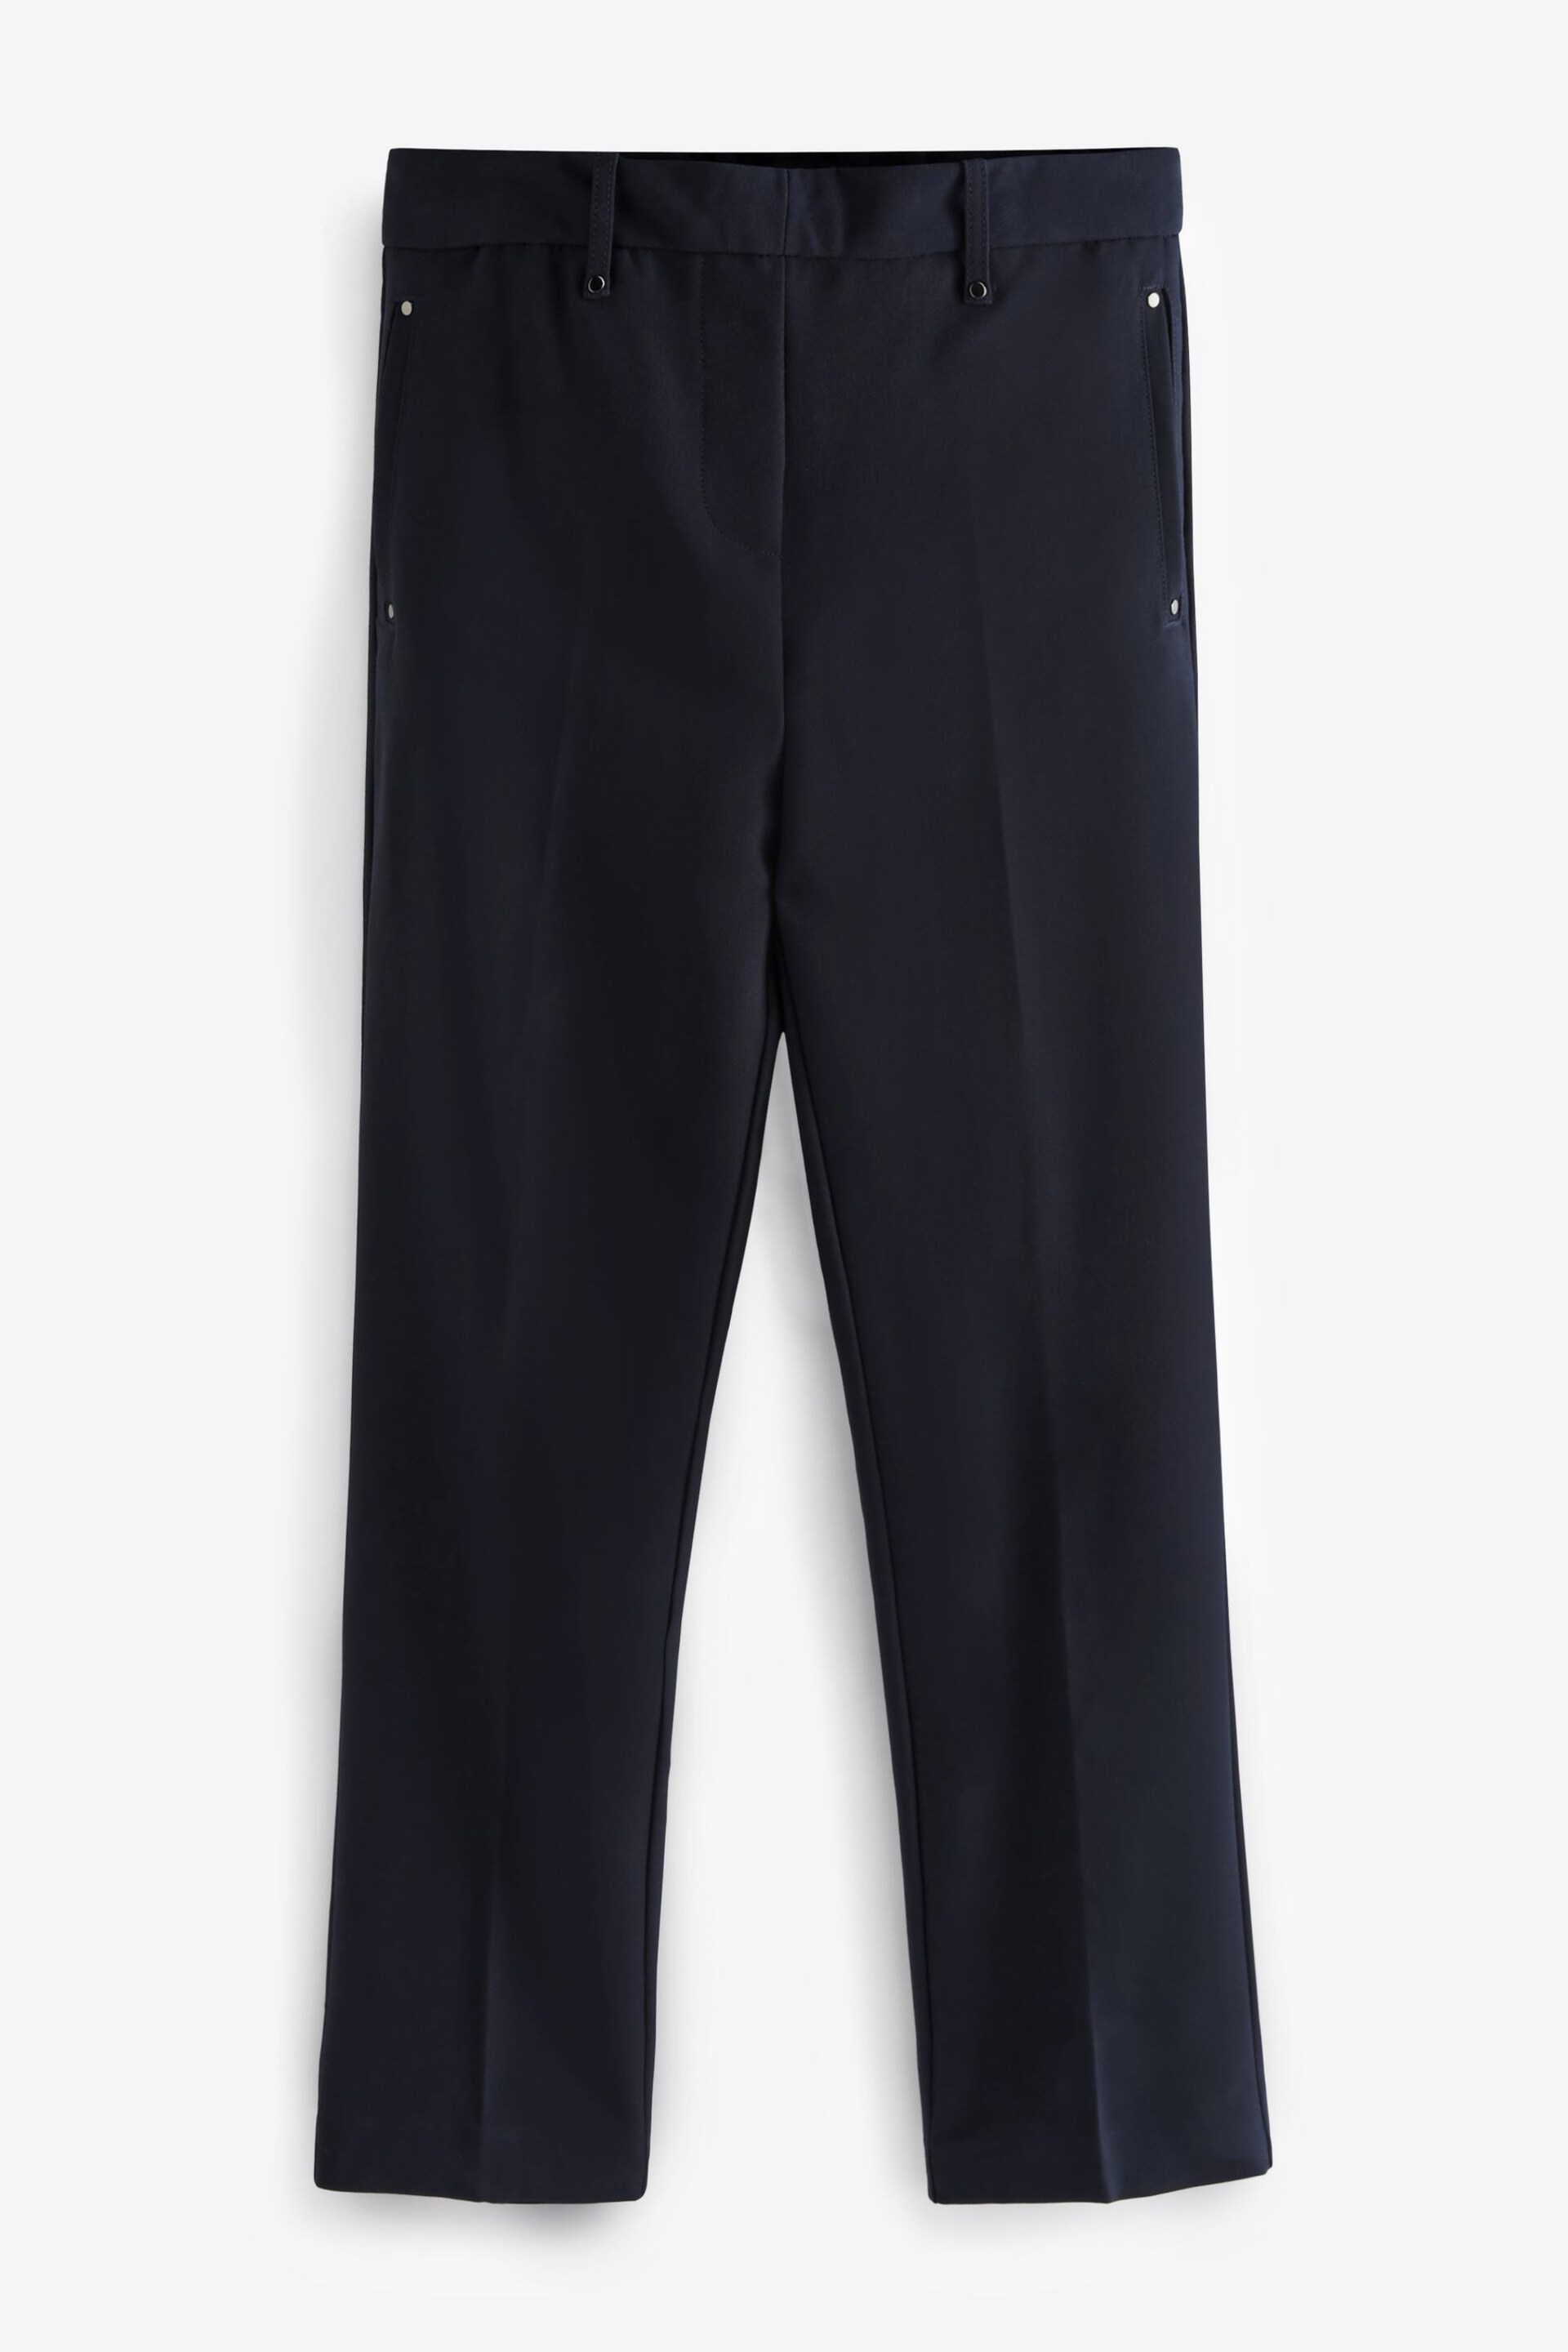 Navy Blue Tailored Elastic Back Straight Leg Pull On Trousers - Image 5 of 5